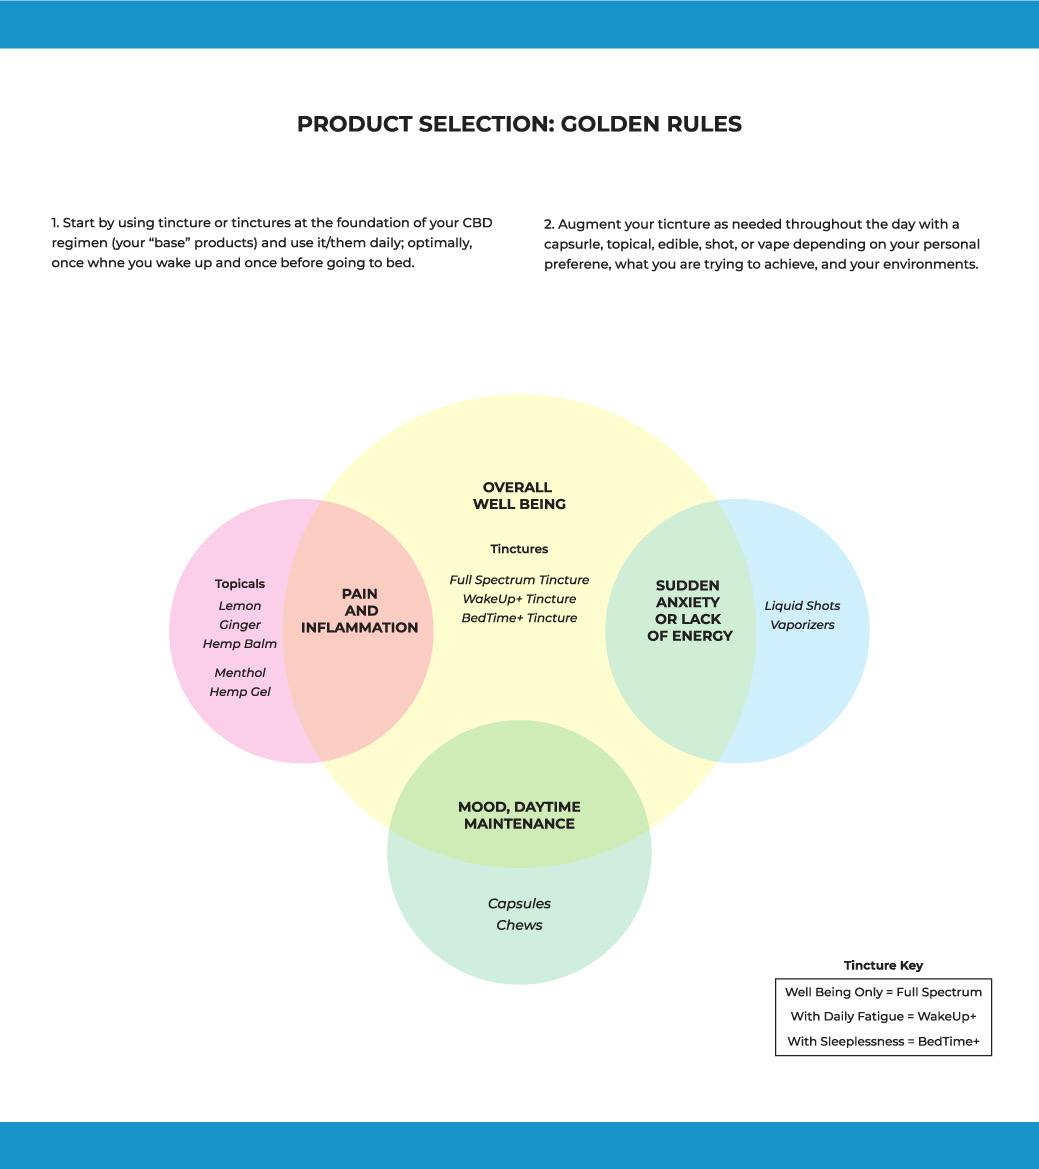 The golden rules of product selection